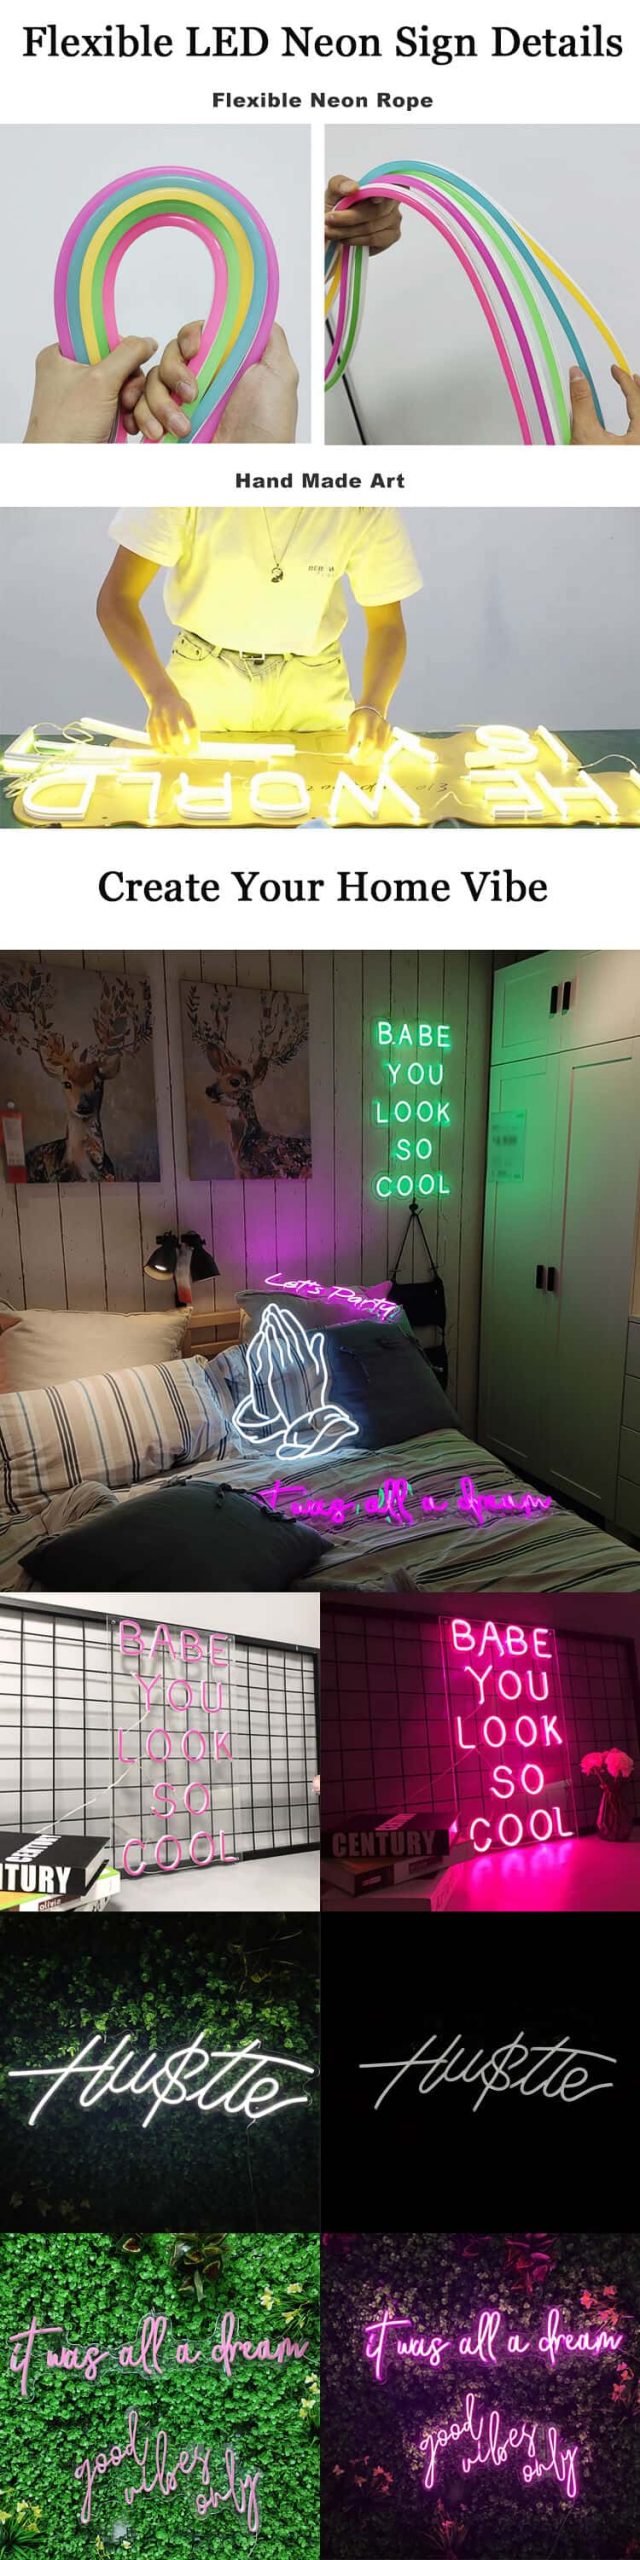 LED Neon Signs Product Details